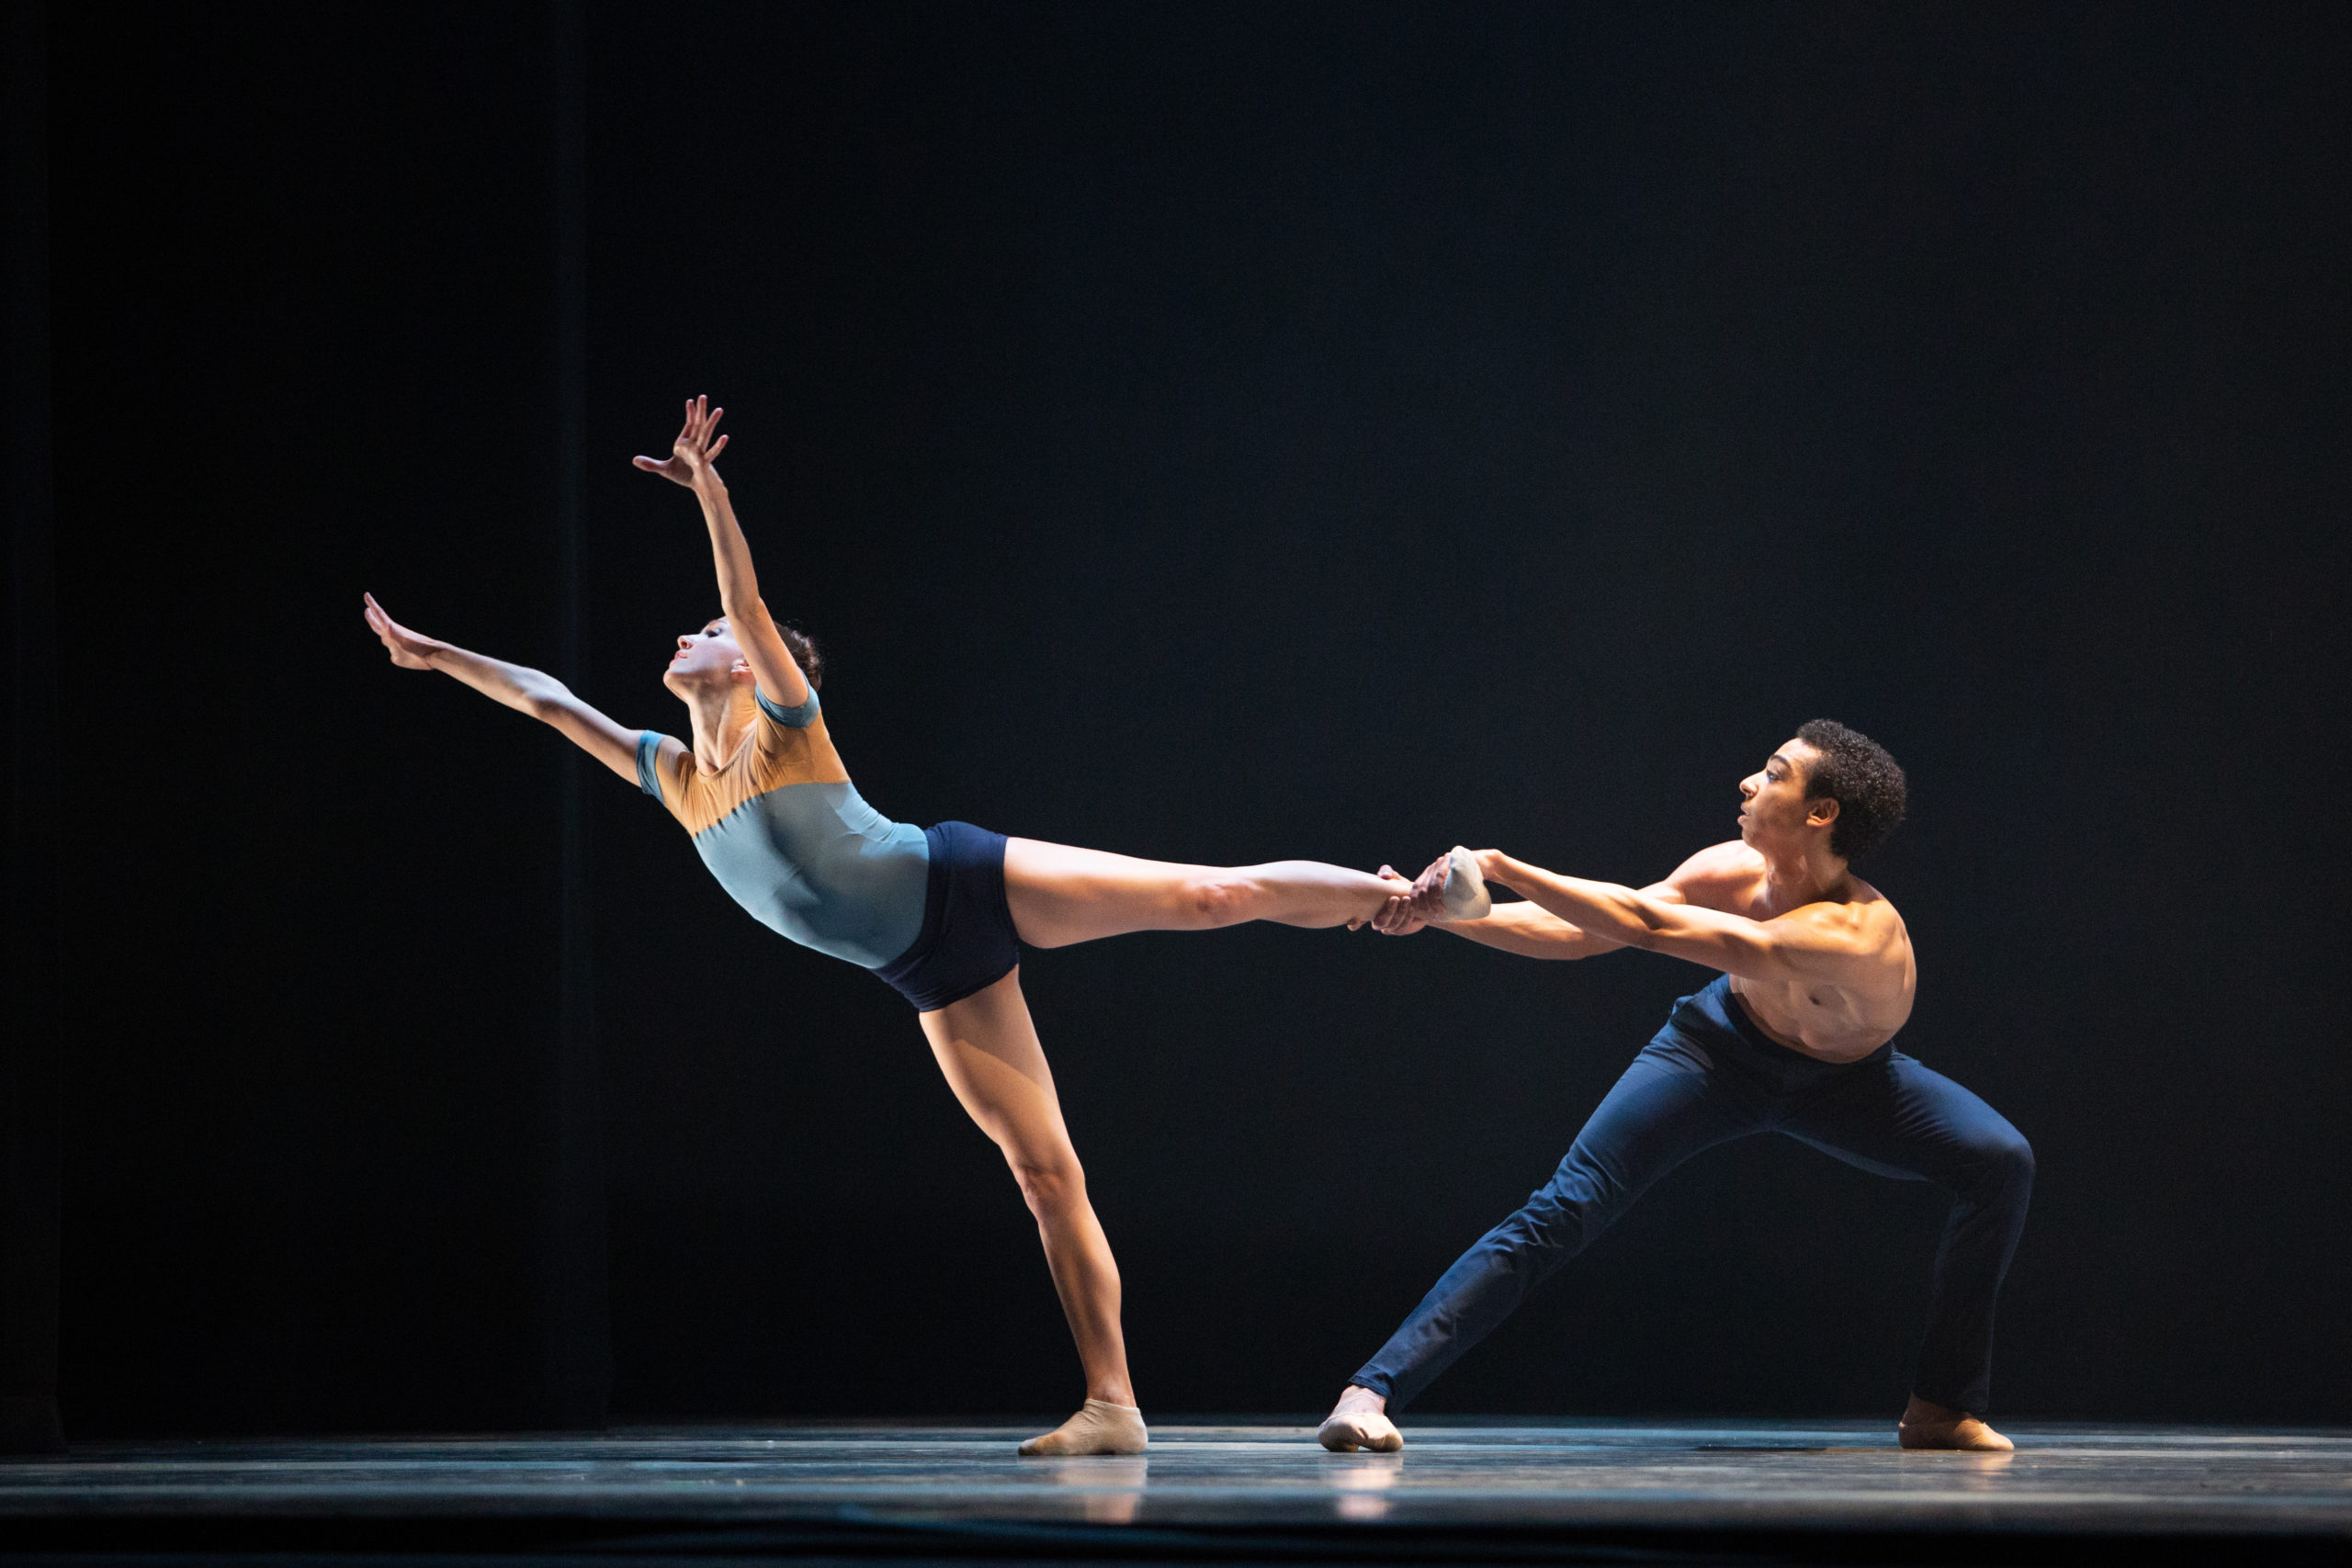 Ethan Price lunges on his left leg and pulls Jillian Barrell's left flexed foot as she stretches in arabesque with her arms reaching out high with fingers splayed. She wears a light blue leotard, dark blue bootie shorts and socks while Price wears dark blue pants and socks.